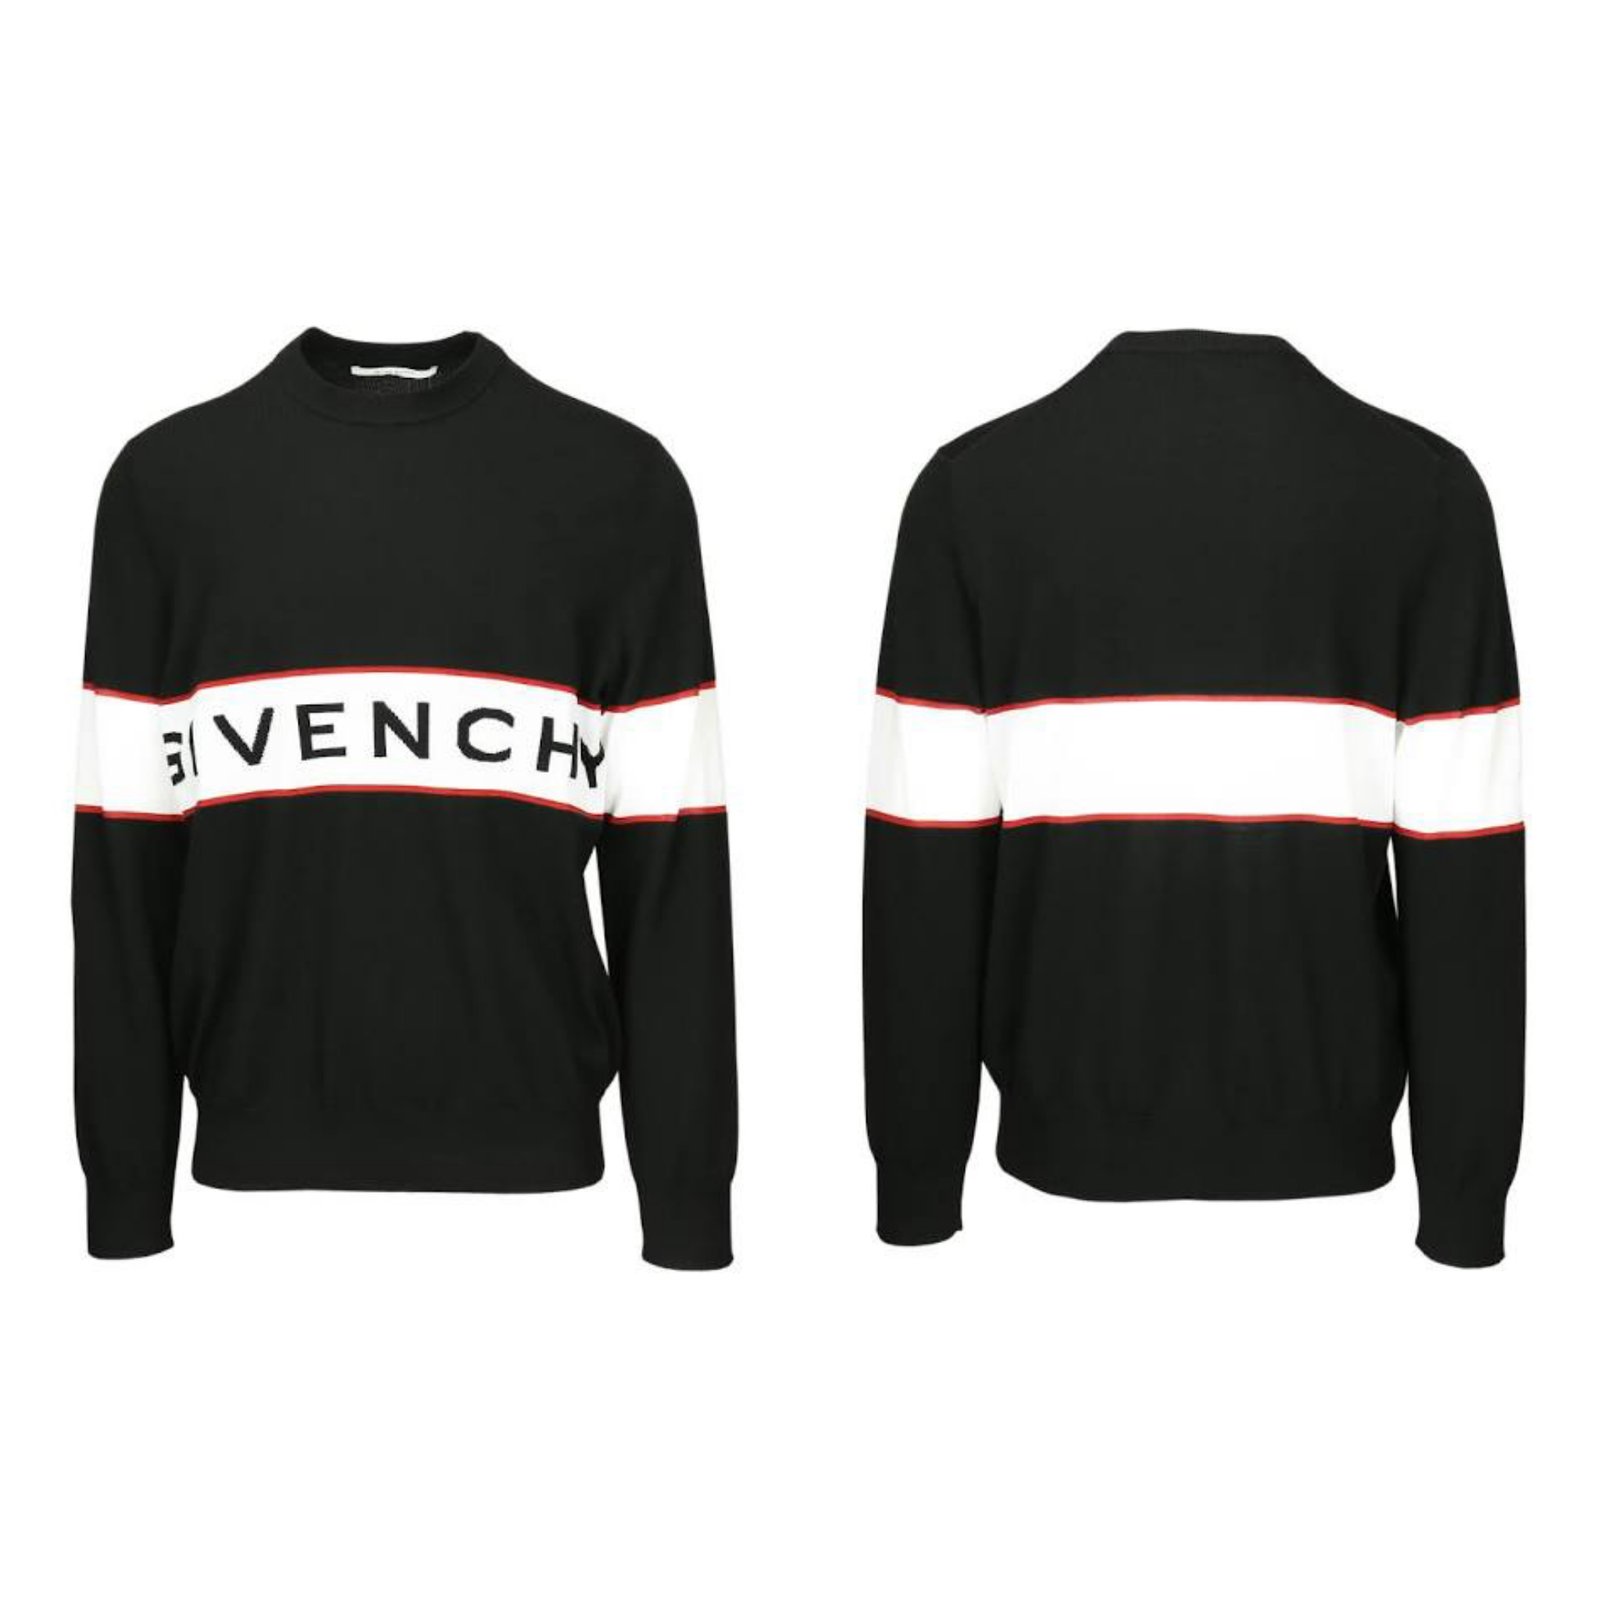 Luxury sweater for men - Givenchy blue logo sweater